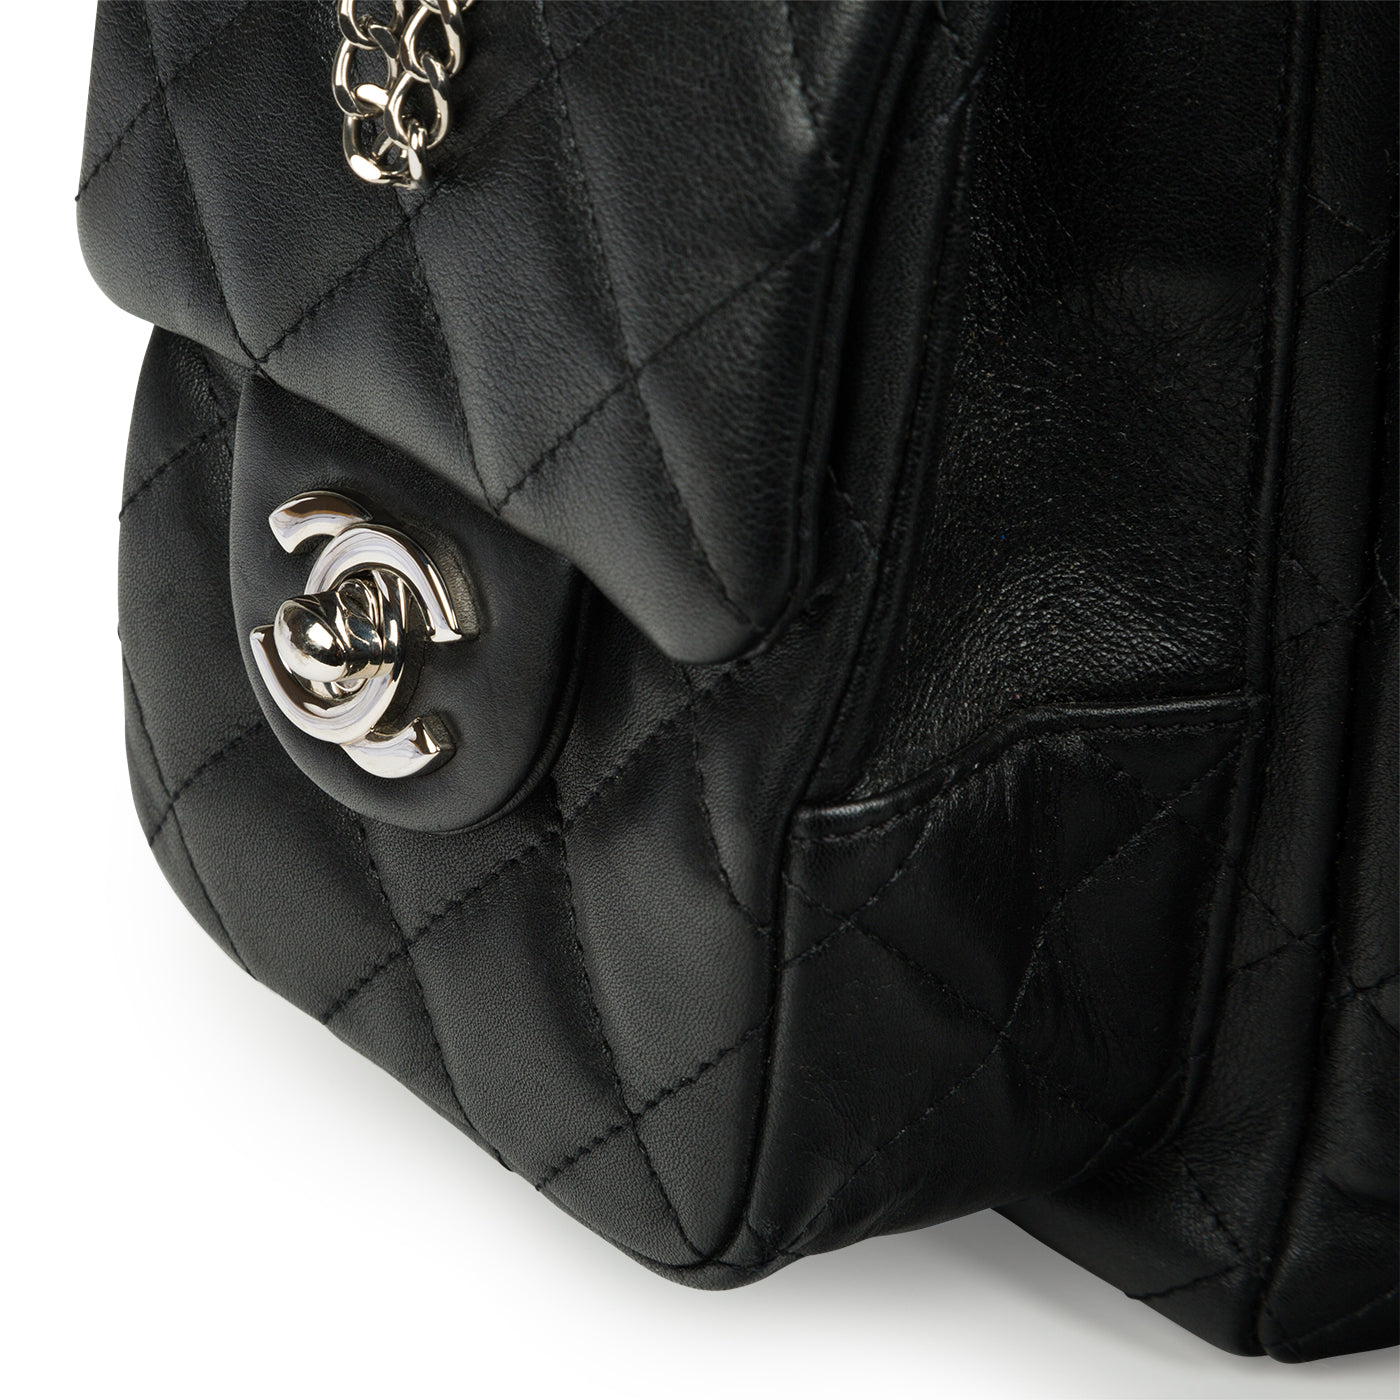 Chanel Black/White Quilted Leather Ligne Cambon Reporter Bag